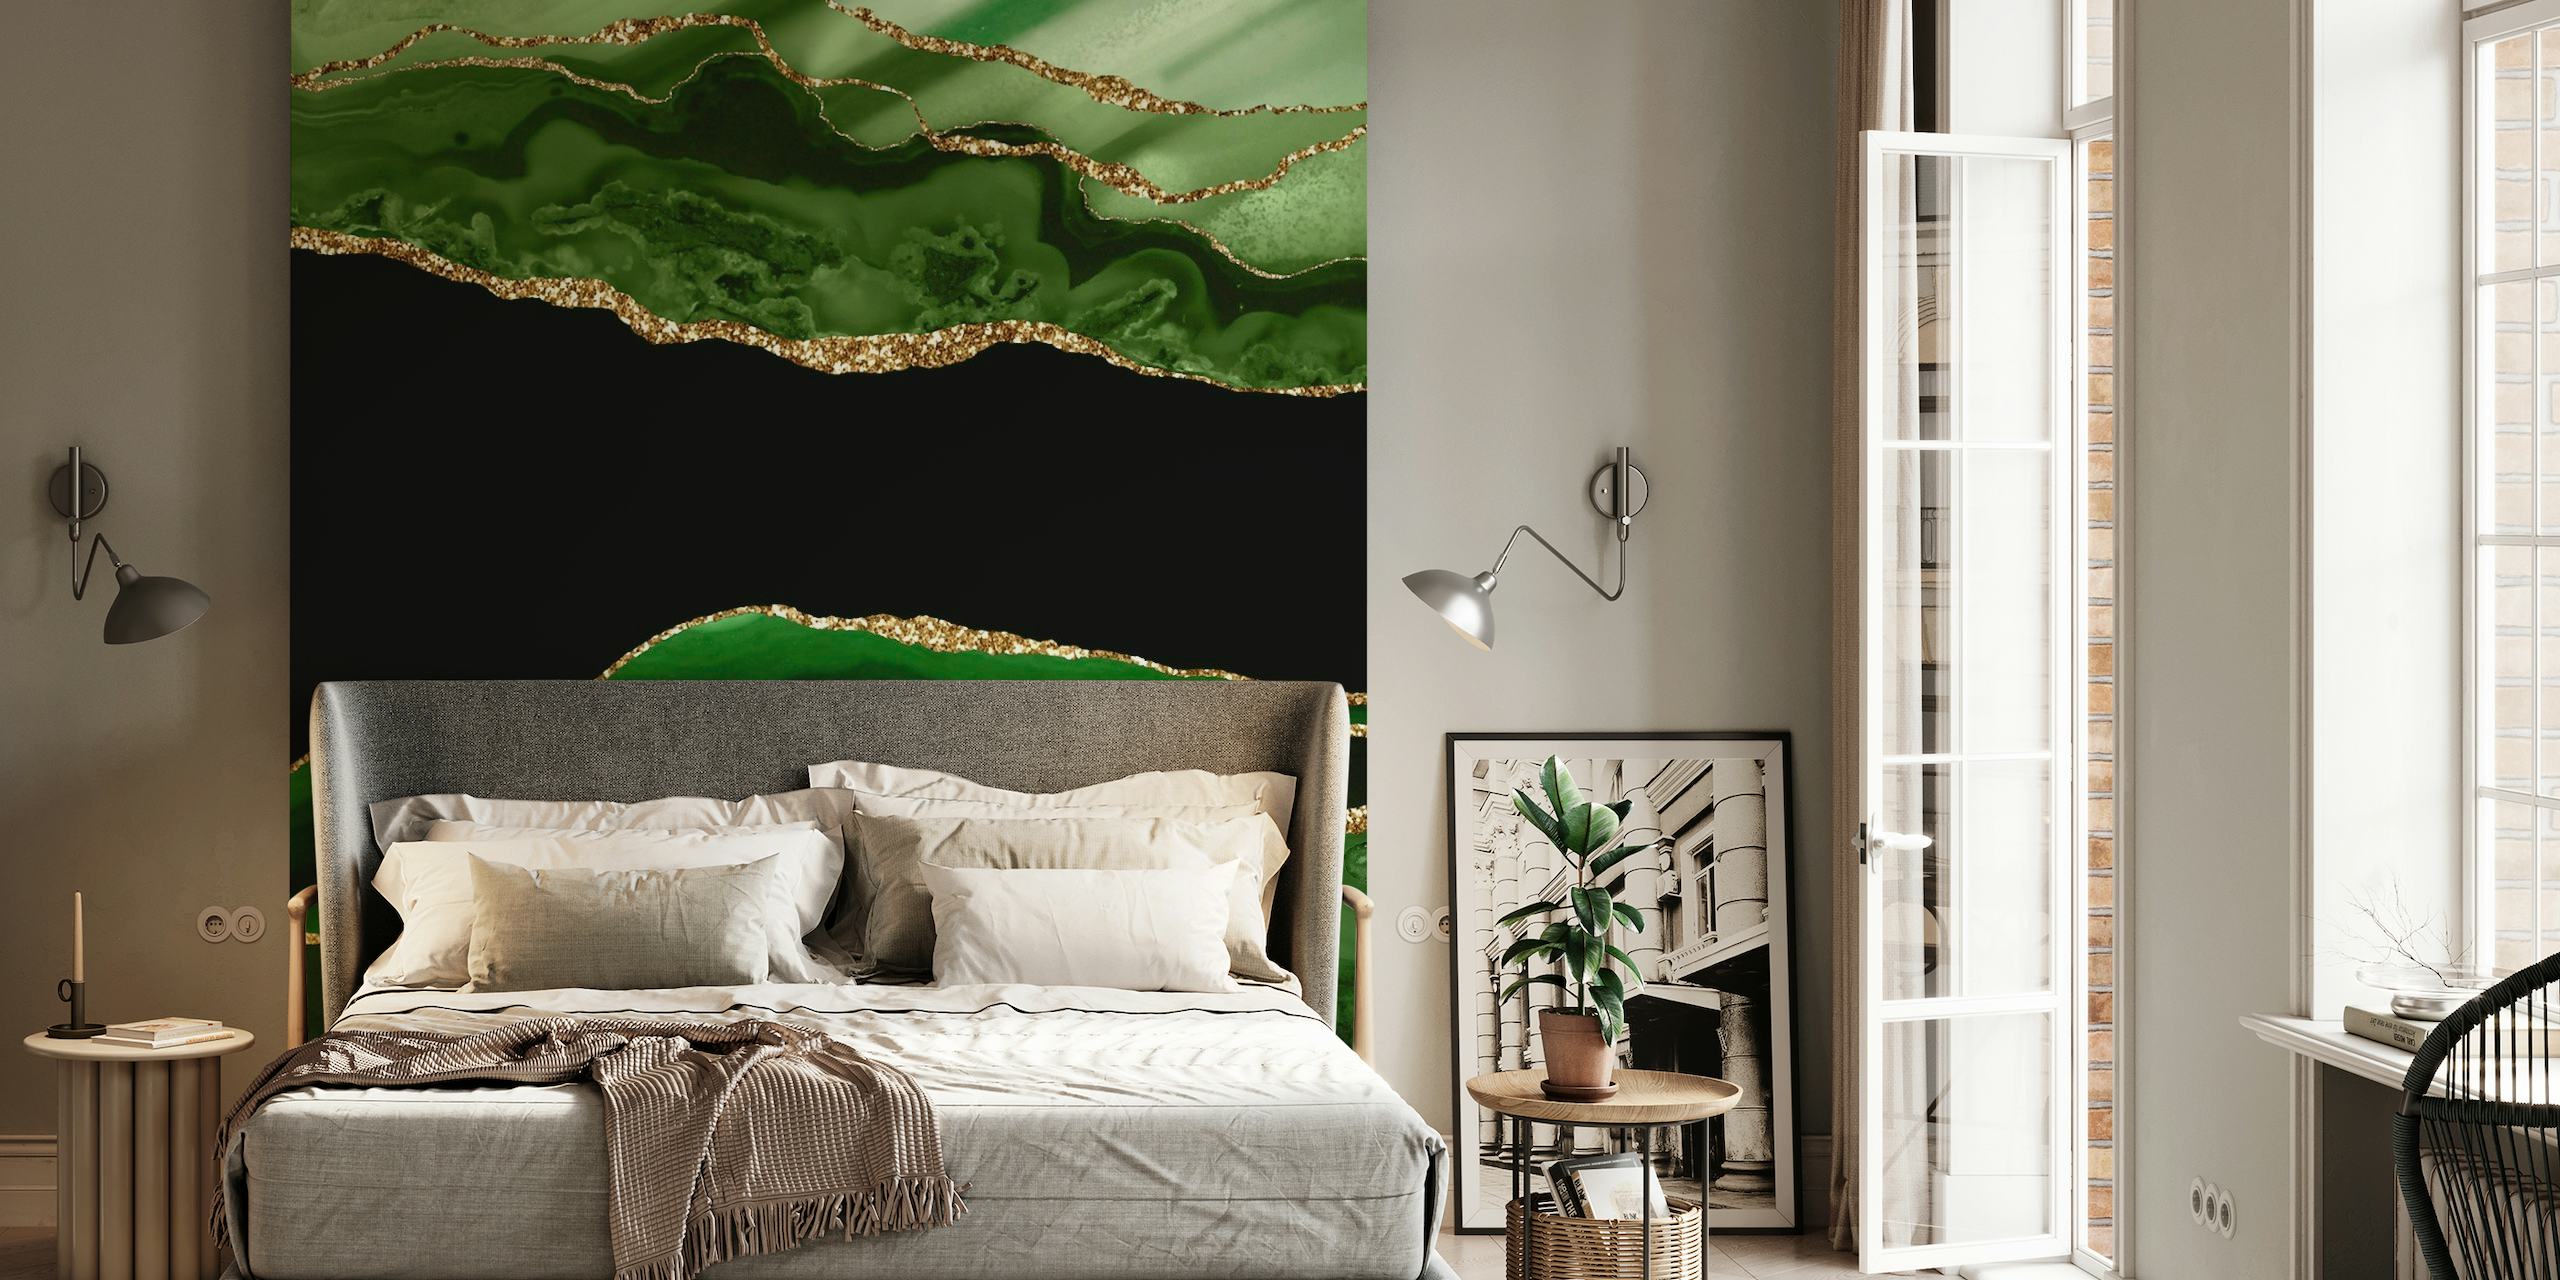 Emerald Green Mermaid Marble wall mural featuring rich green tones with gold accents